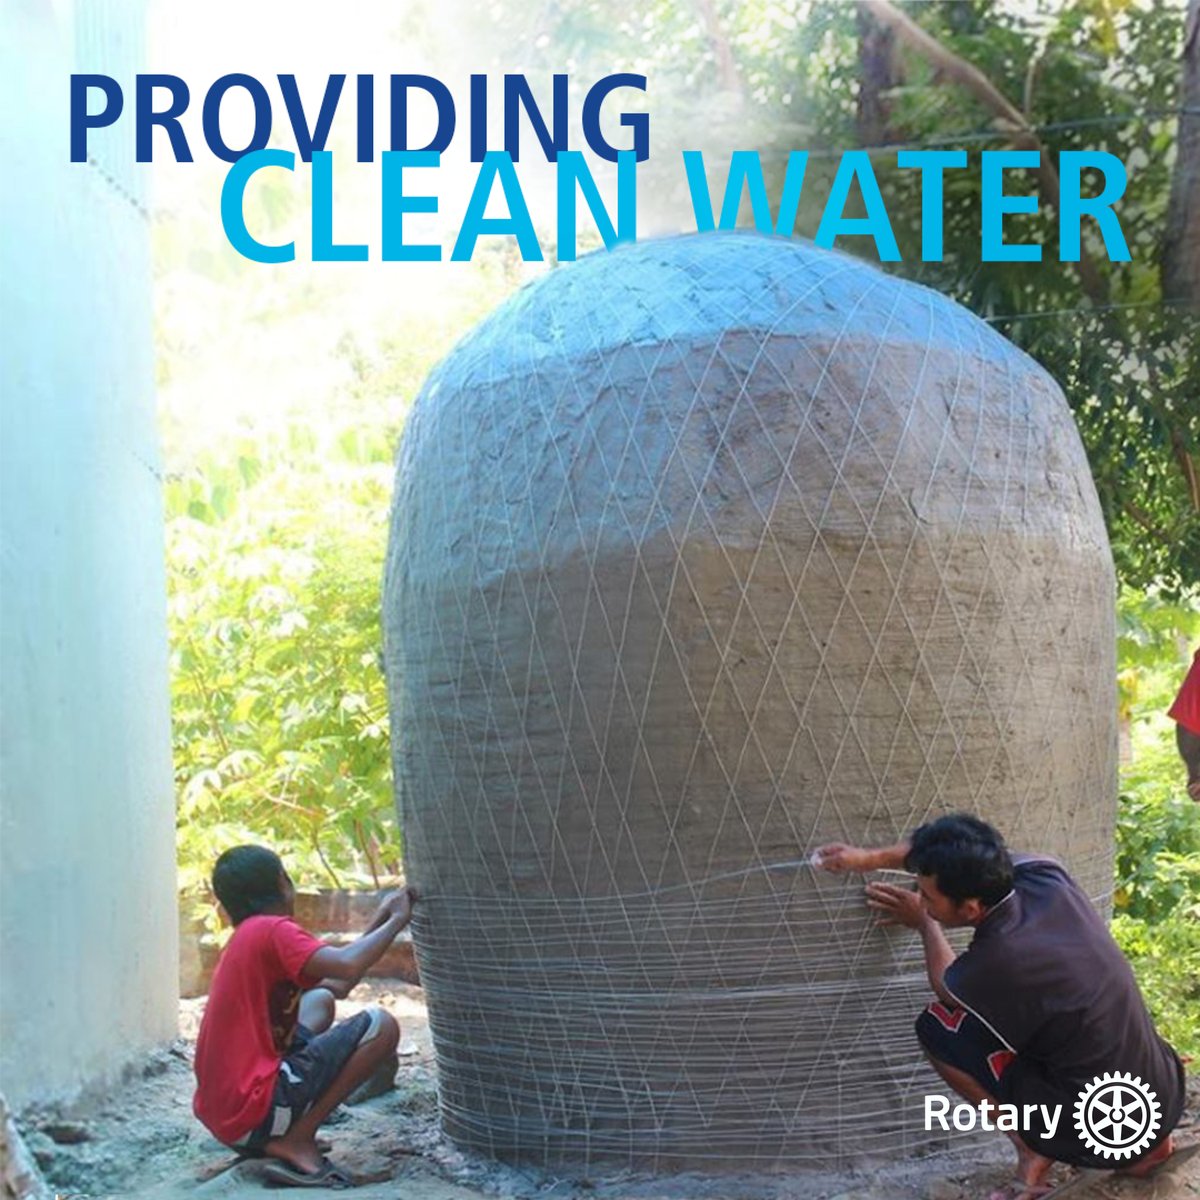 Let’s talk about one of #Rotary’s Causes: Clean Water, Sanitation and Hygiene #CleanWater is an important factor in keeping communities healthy and safe. It helps decrease waterborne diseases and as a result, improves the general well-being of its recipients. /🧵